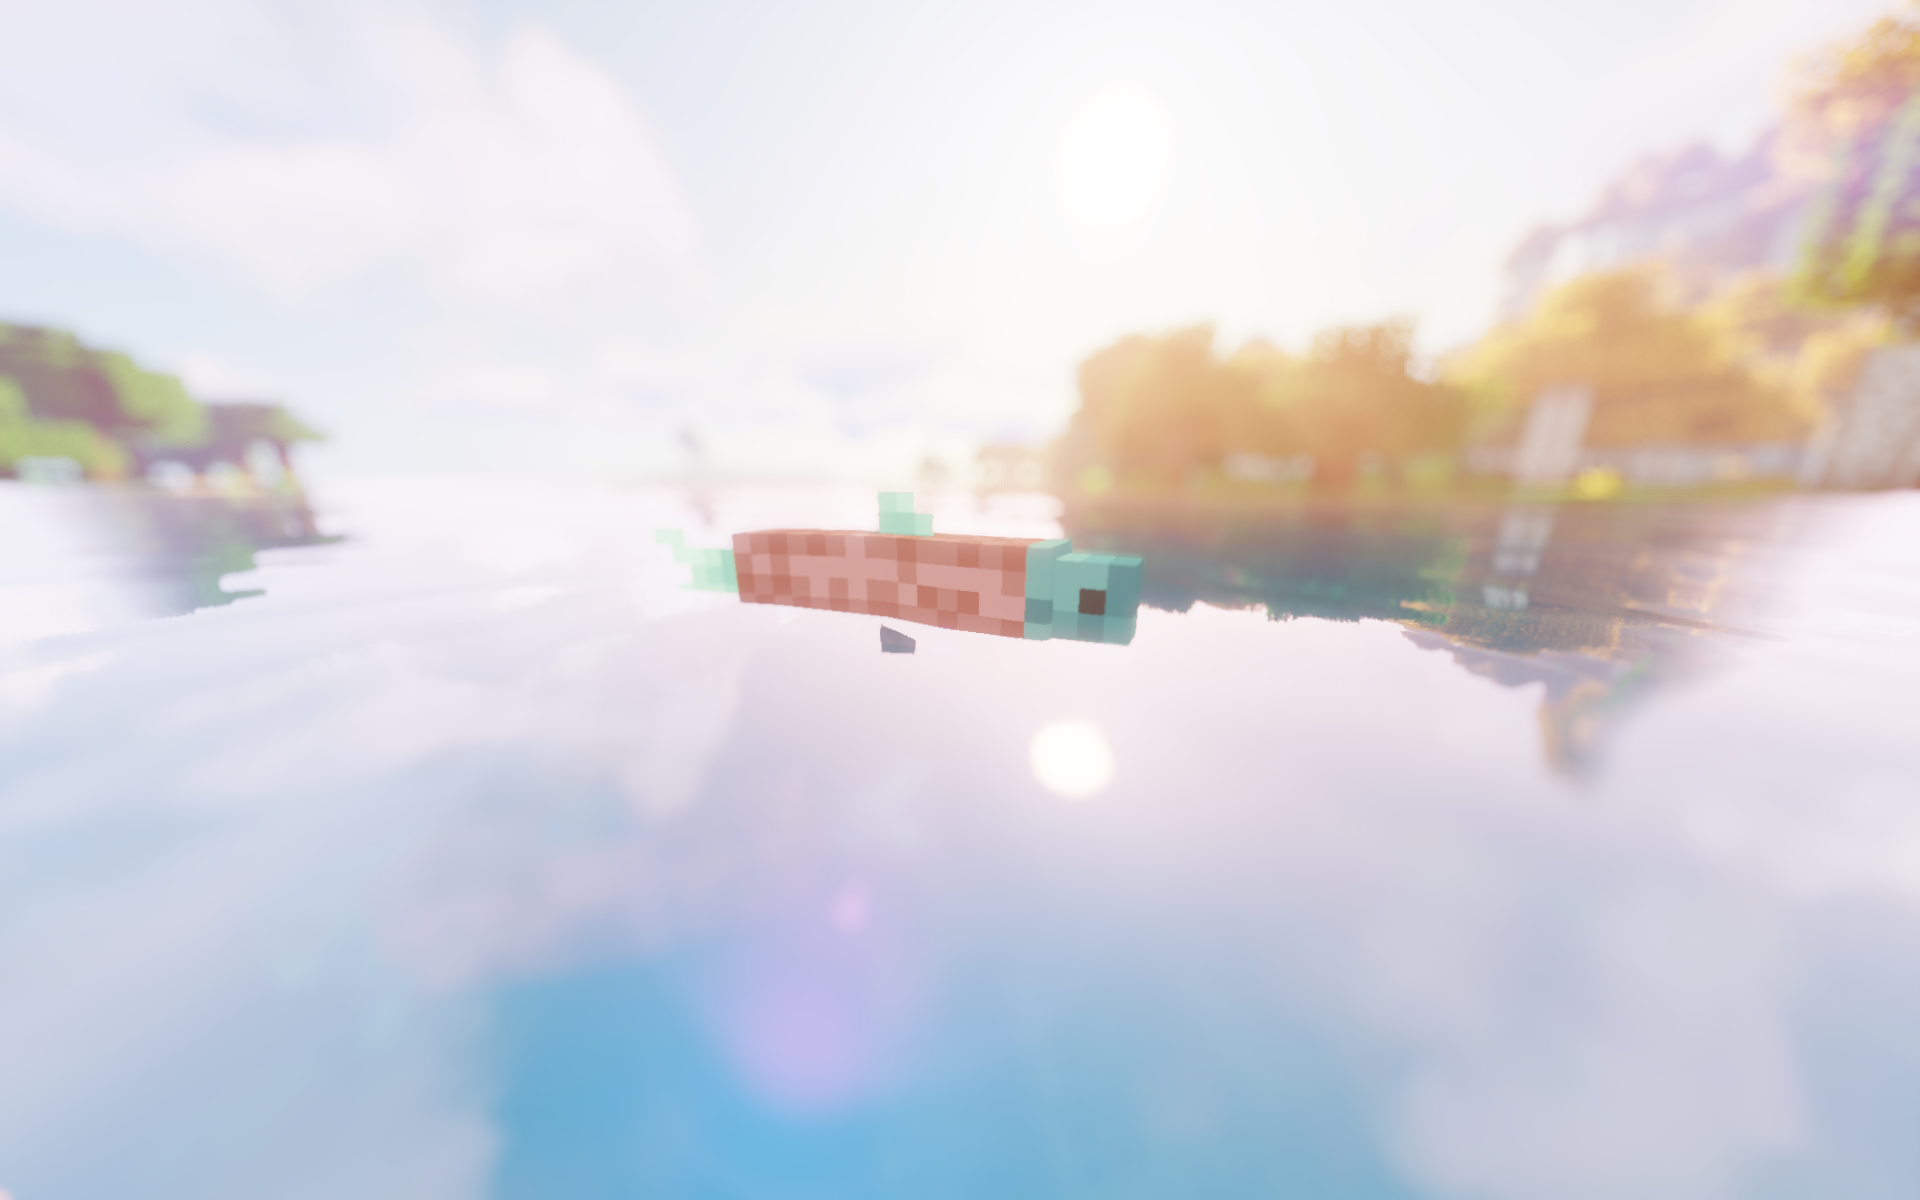 General 1920x1200 Minecraft shaders video games CGI video game art cube water fish sky clouds animals blurred blurry background reflection screen shot